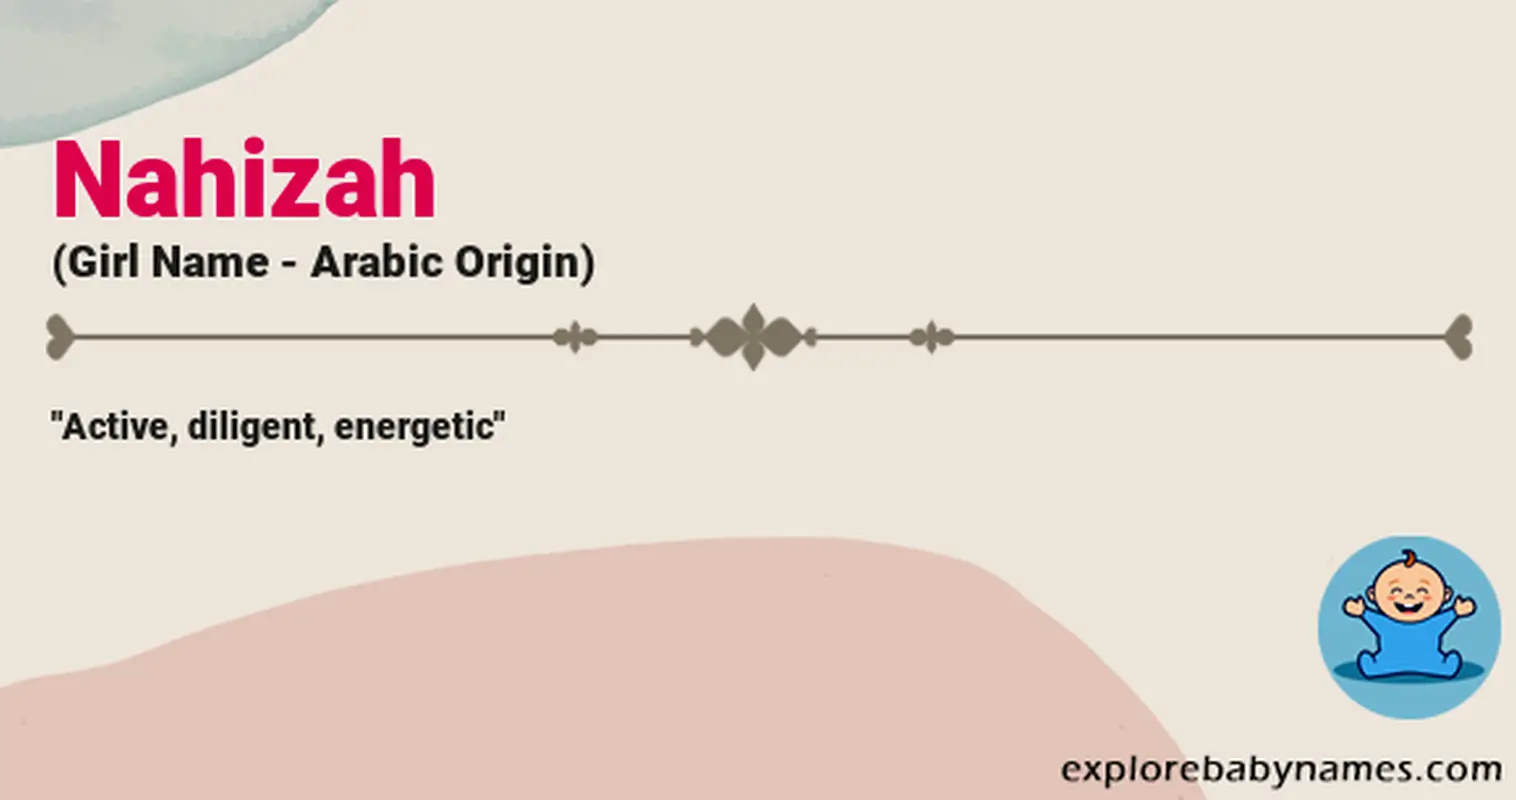 Meaning of Nahizah